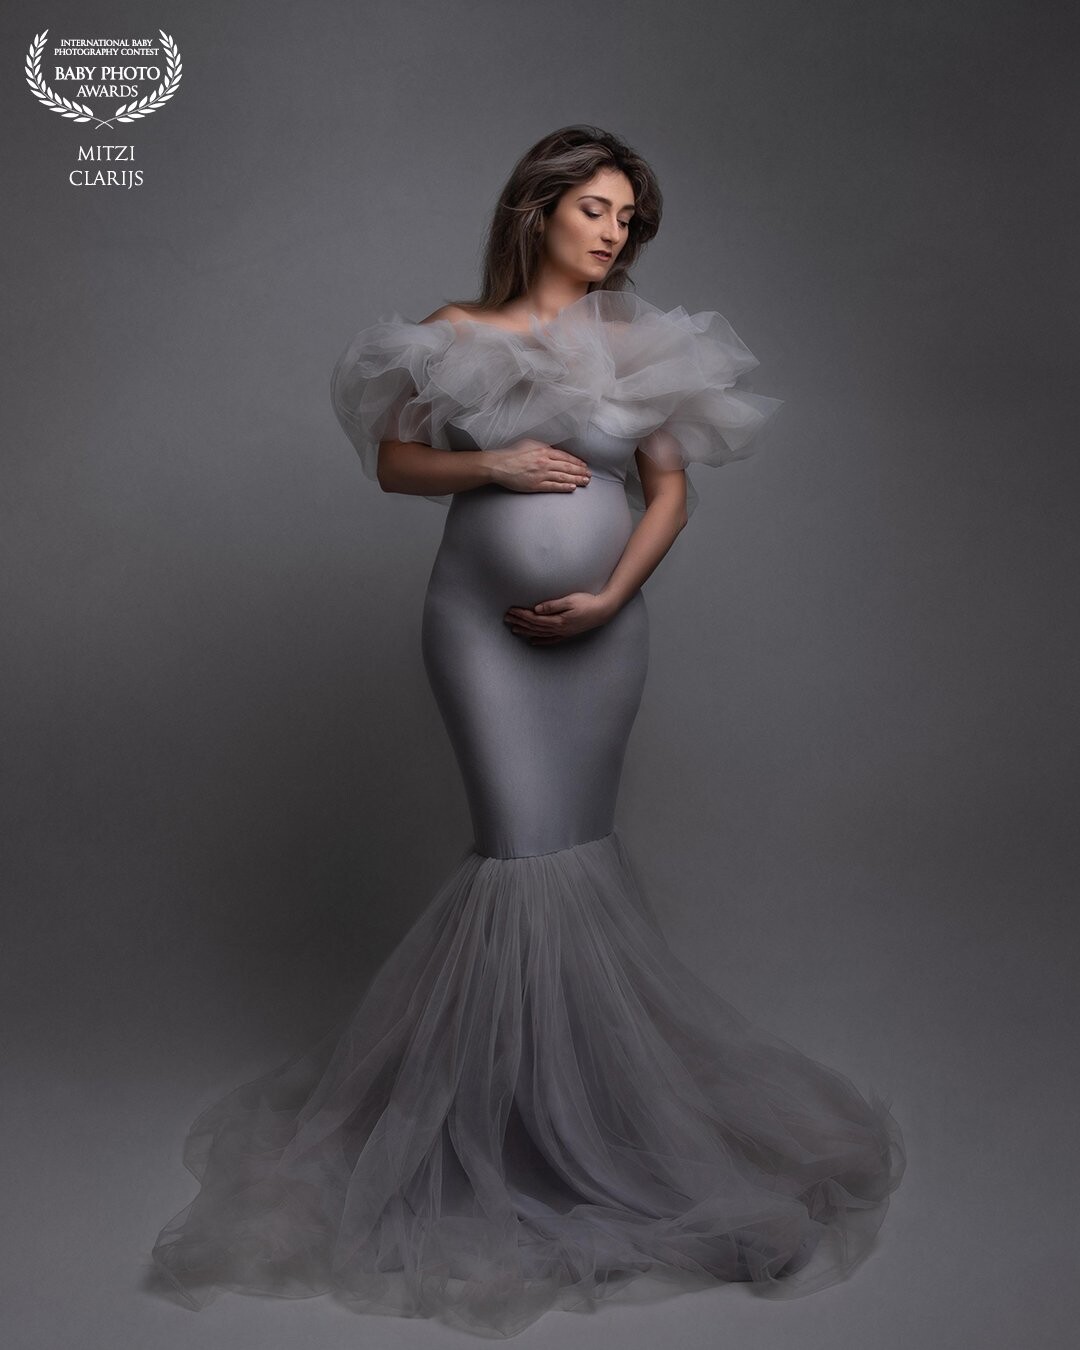 This gorgeous mom came to me with her family for her pregnancyshoot. This dress really looks amazing on her! I love how it compliments her in every single way.